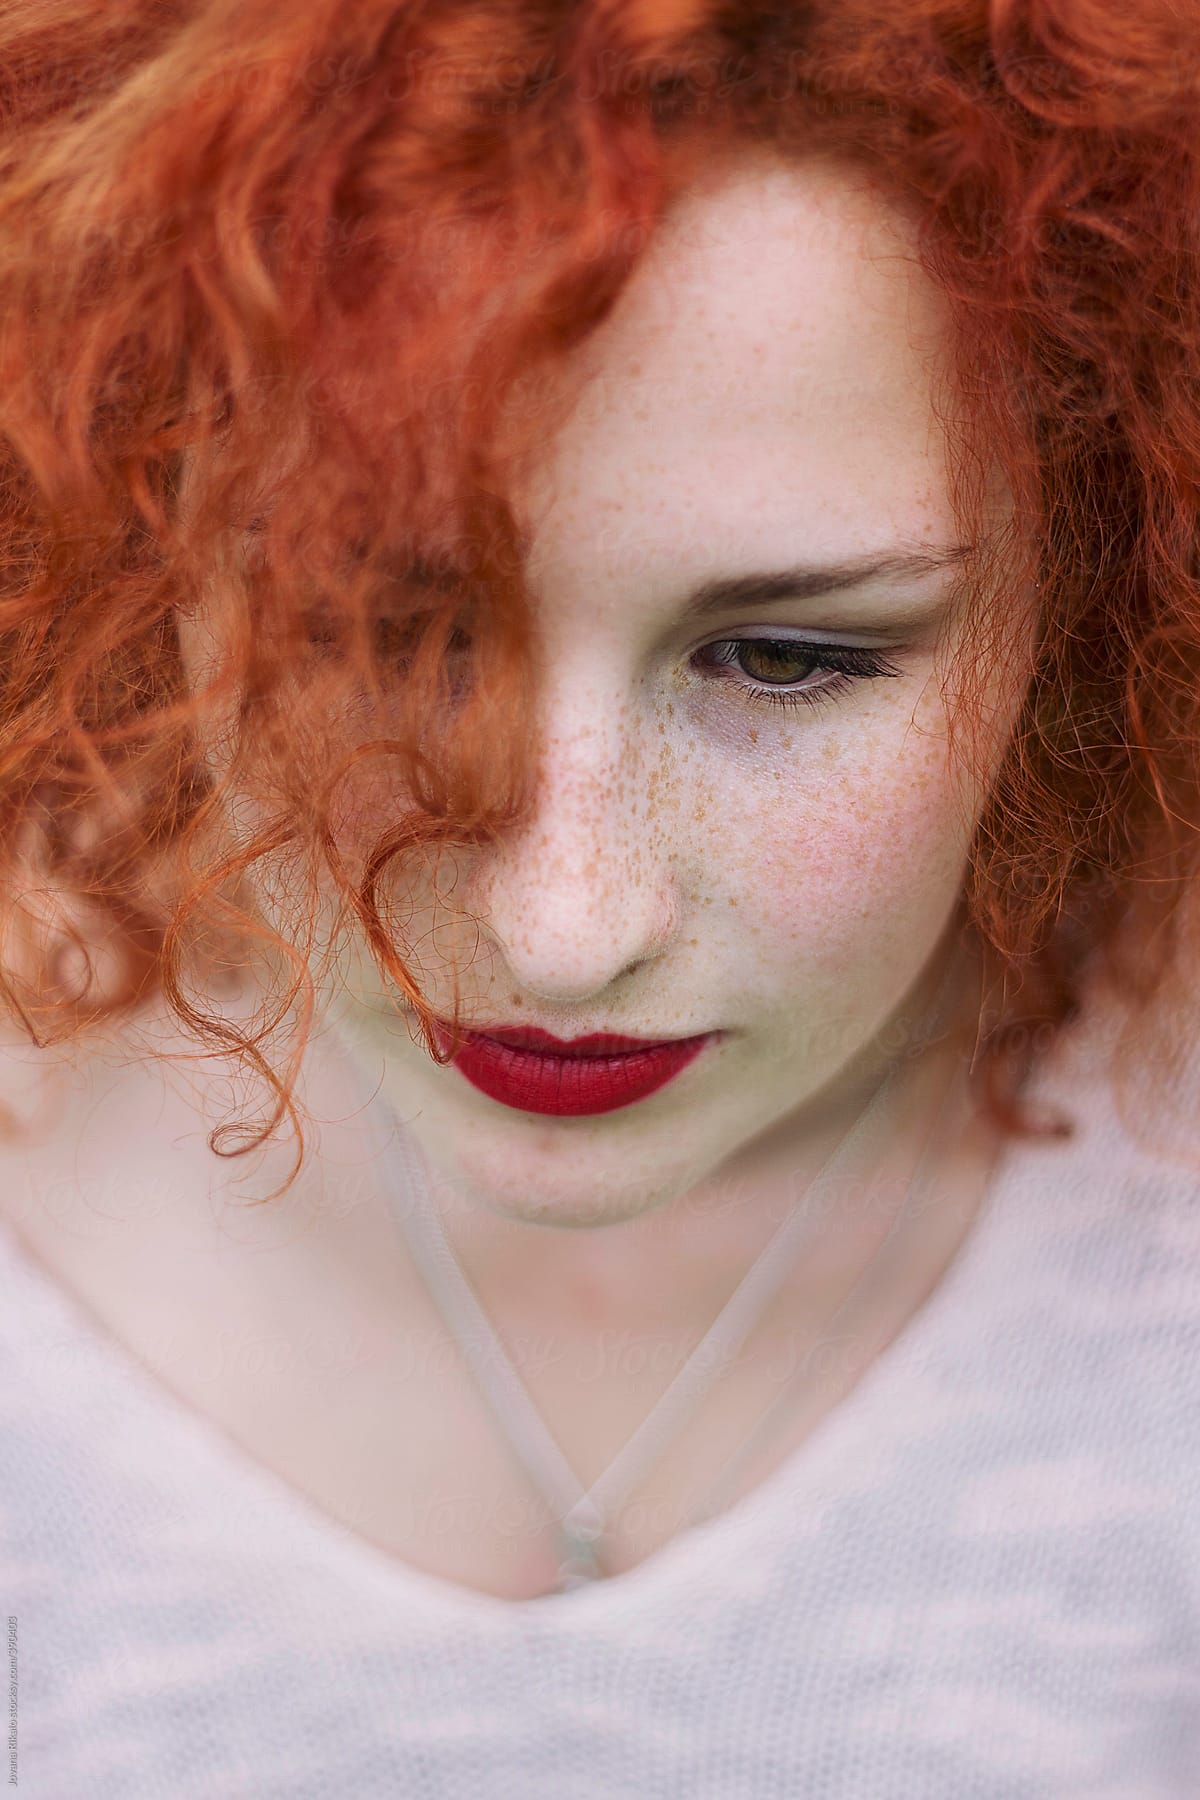 Ginger Haired Woman With Freckles By Stocksy Contributor Jovana Rikalo Stocksy 